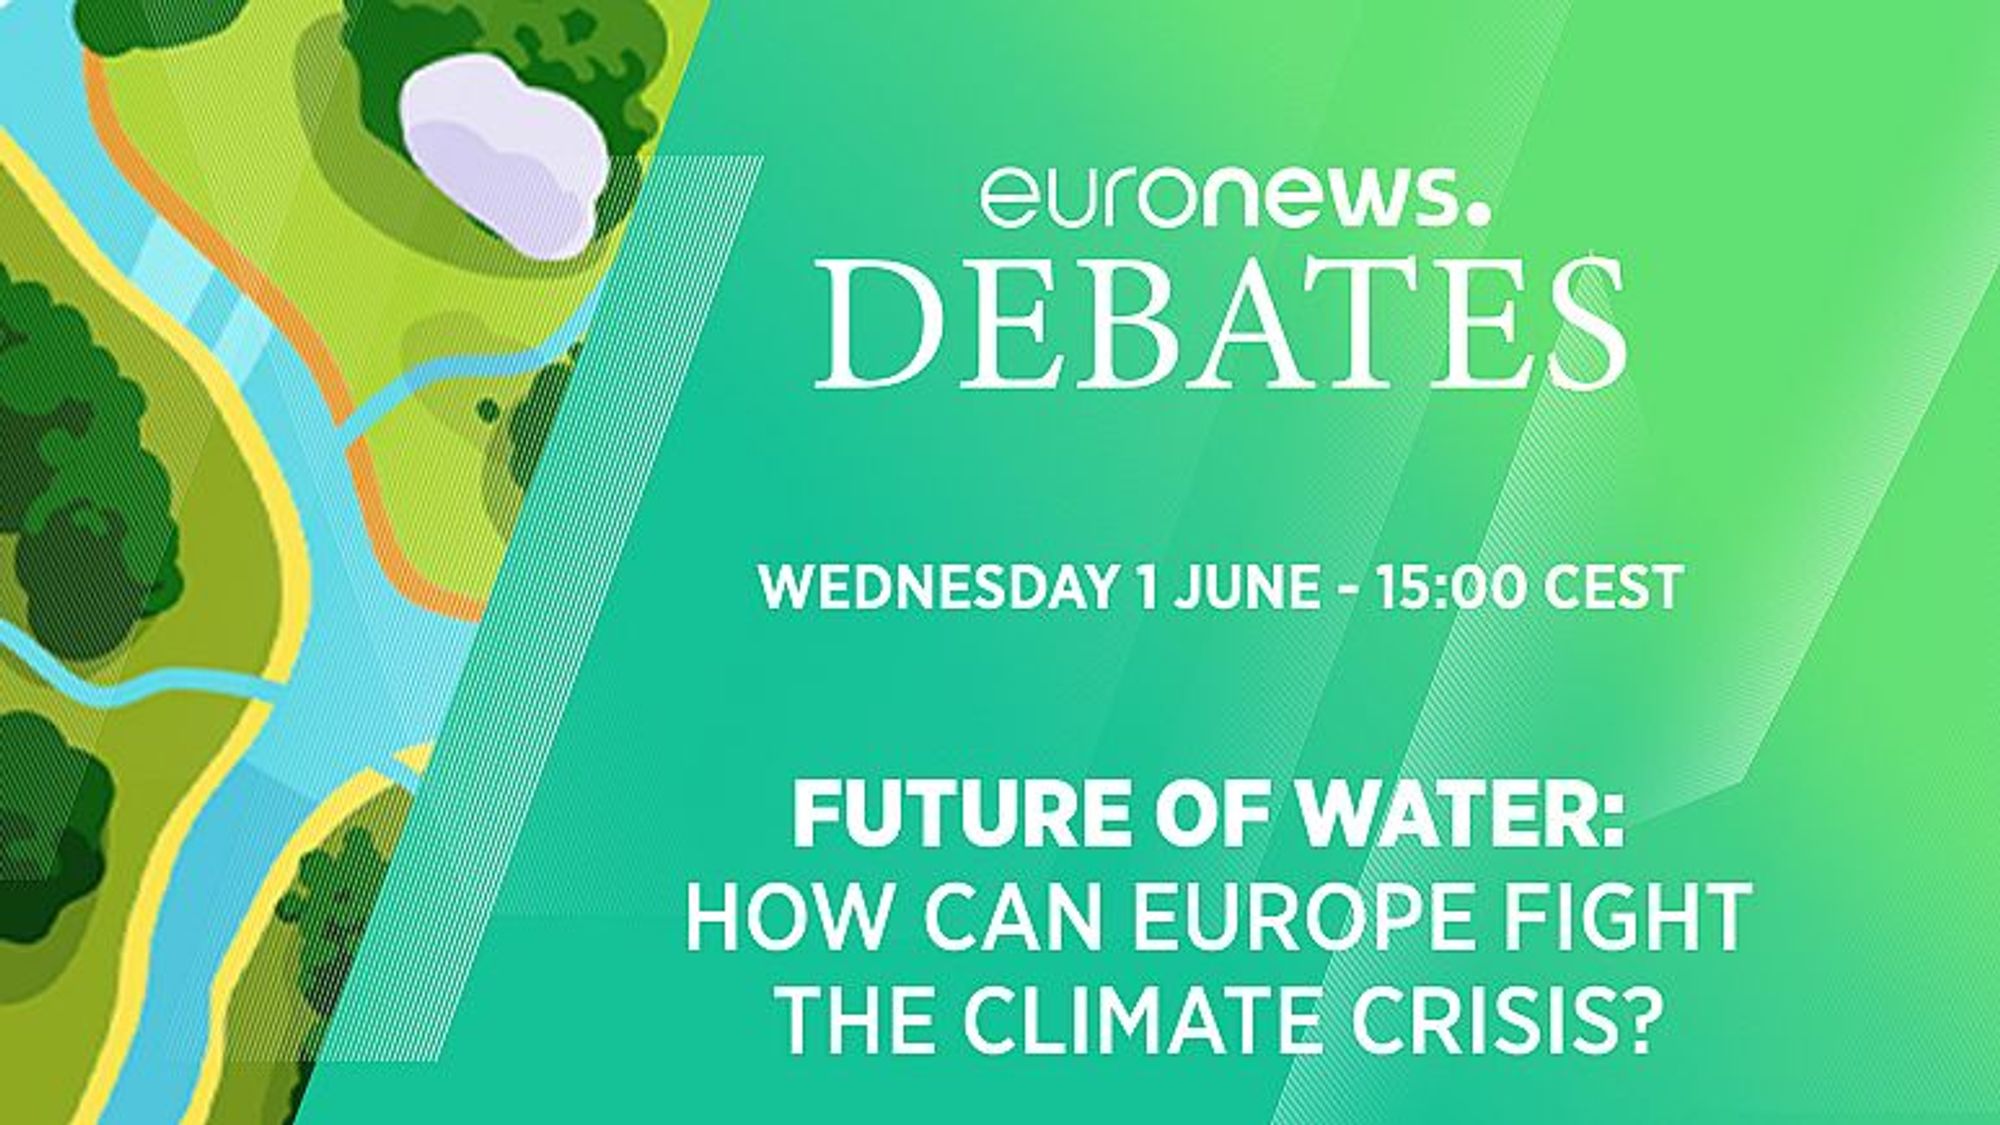 The future of water: How can Europe fight the climate crisis? | Euronews